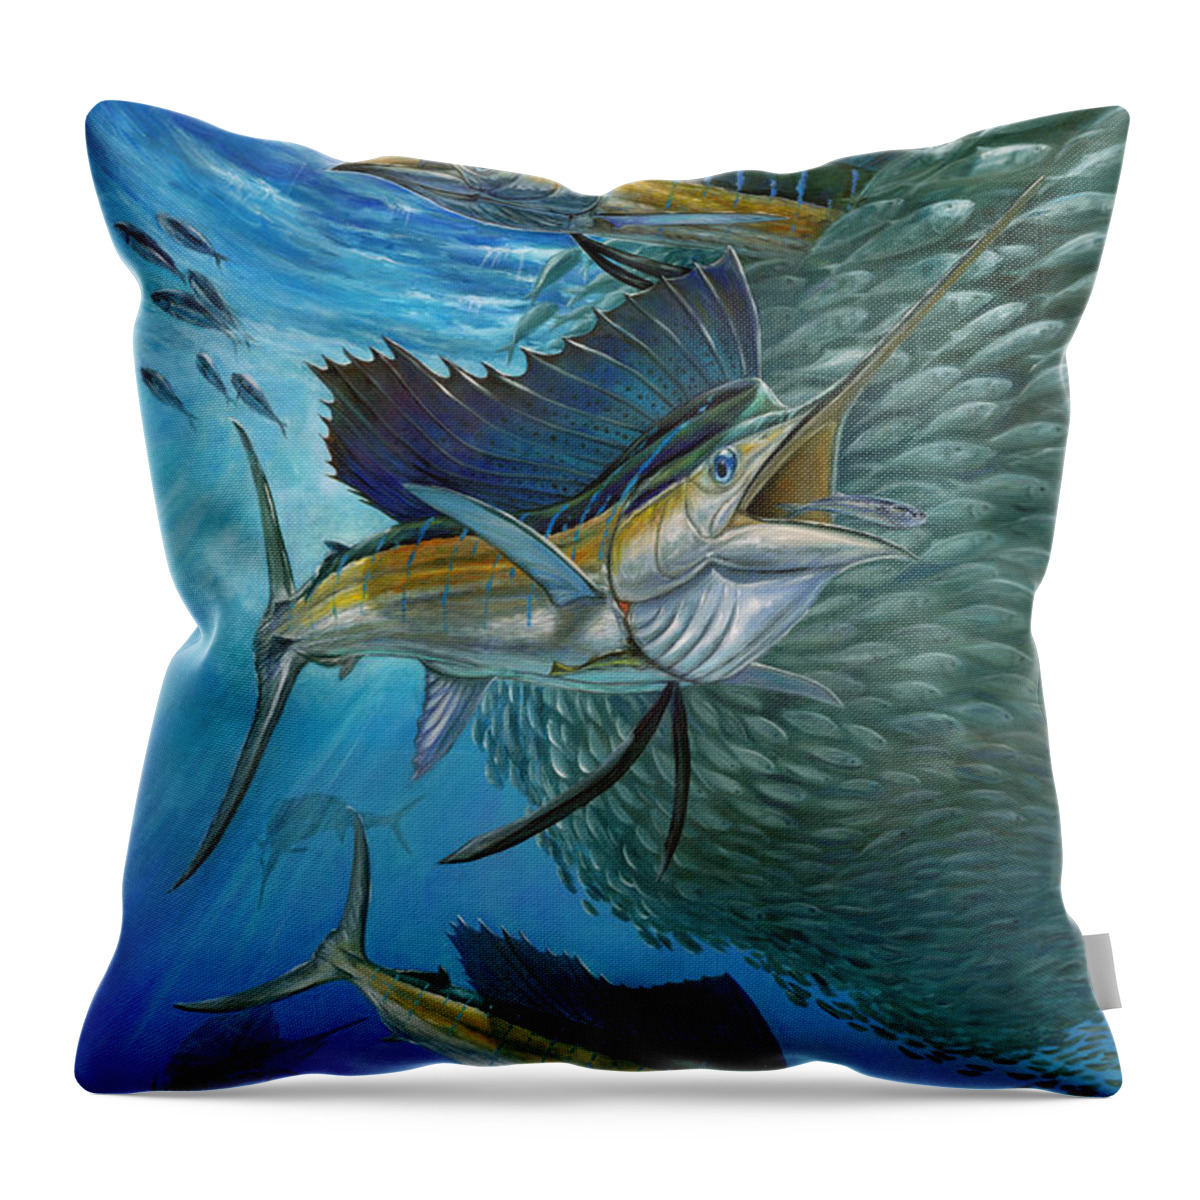 Sailfish Throw Pillow featuring the painting Sailfish With A Ball Of Bait by Terry Fox